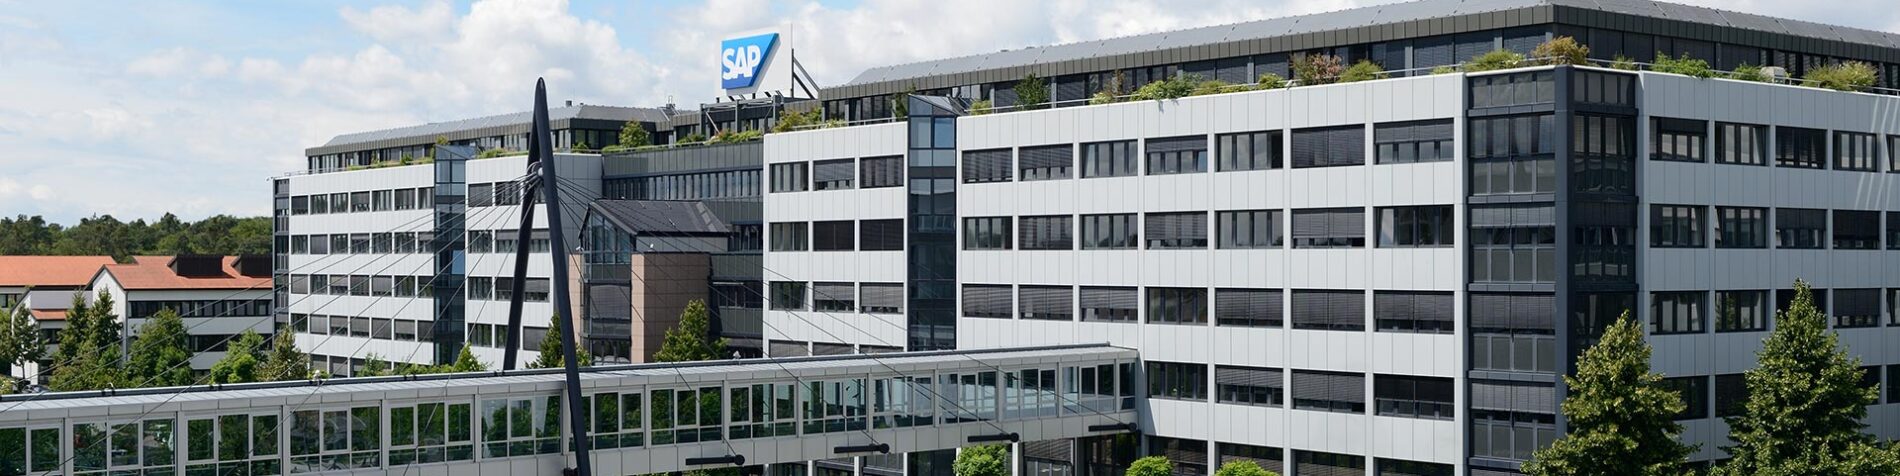 SAP Announces CFO Luka Mucic to Depart Company in 2023